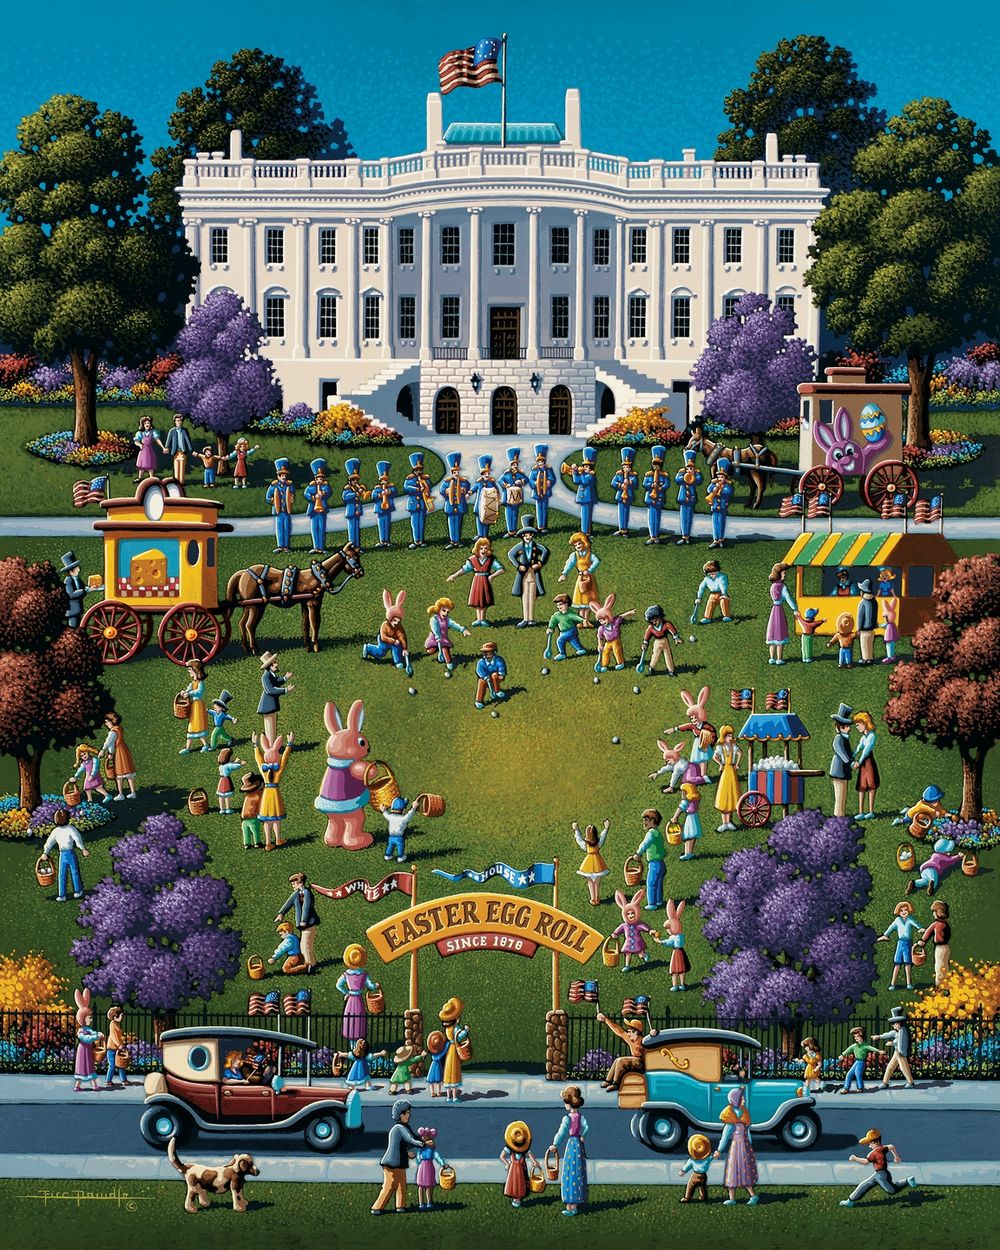 White House Easter - Wooden Puzzle